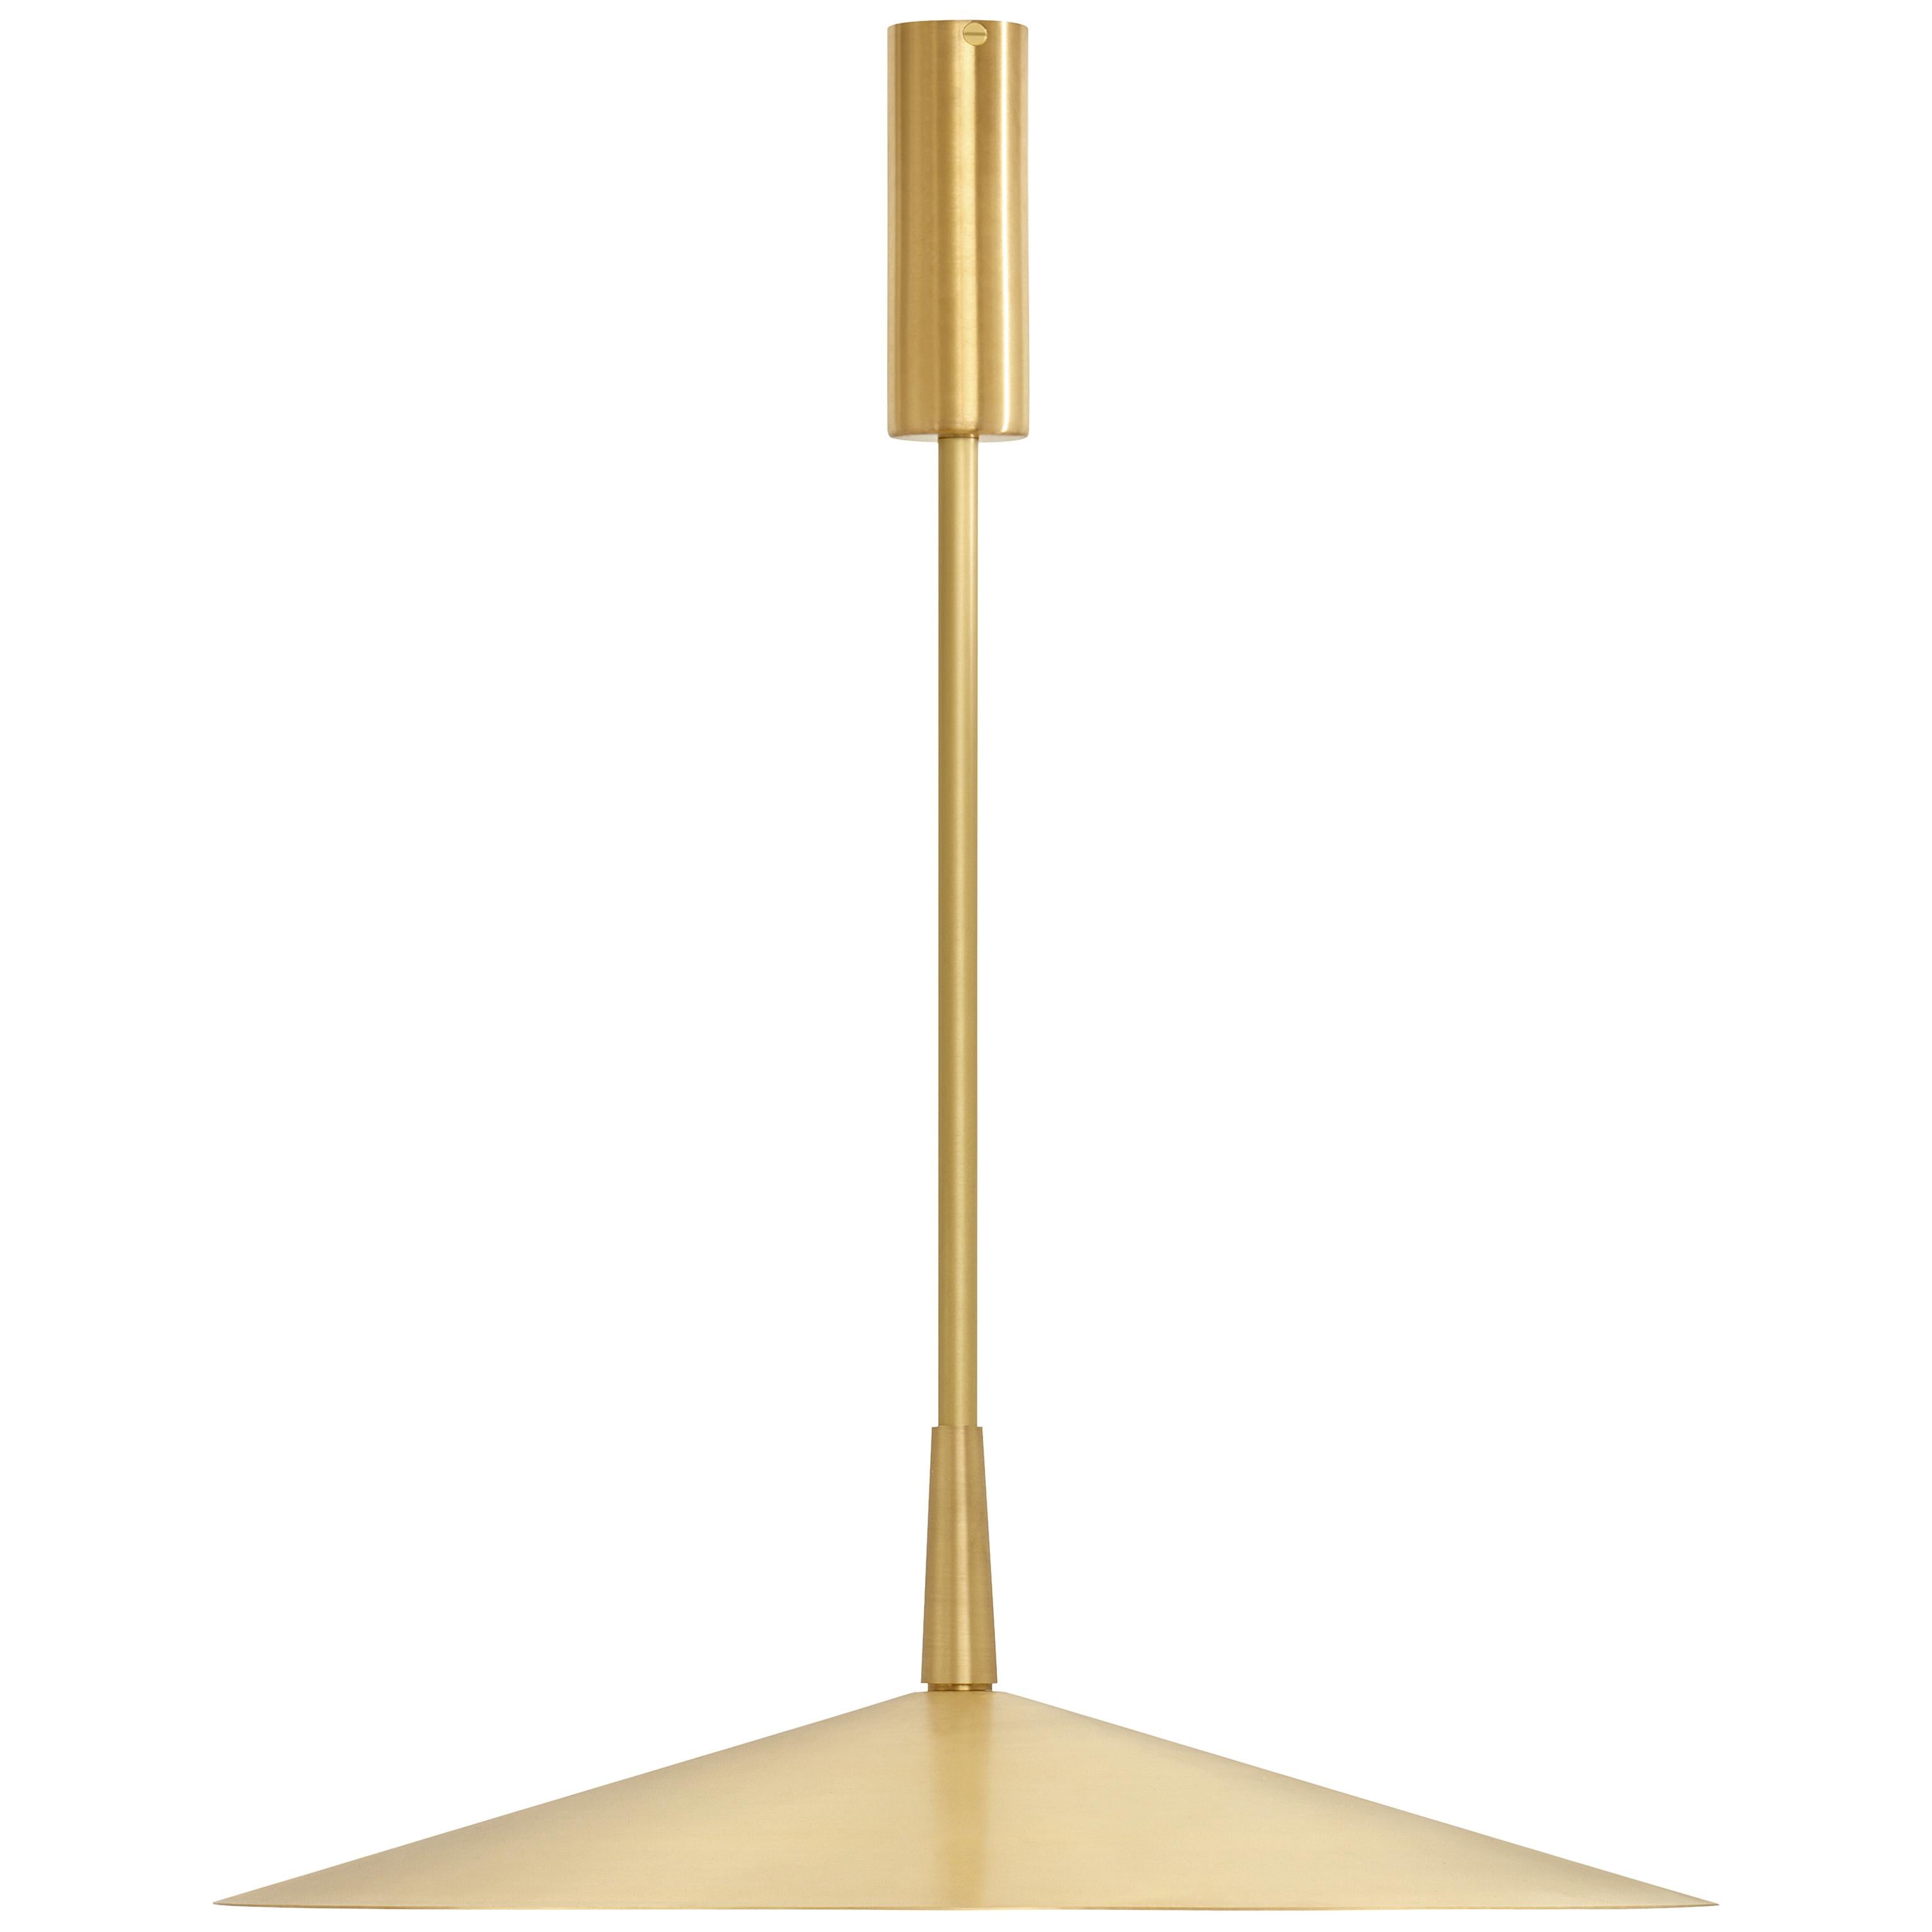 Tinto Medium pendant by CTO Lighting
Materials: satin brass 
Also available in dark bronze shade and finial with satin brass drop rod and ceiling rose
satin brass shade and finial with dark bronze drop rod and ceiling rose
all dark bronze
all satin